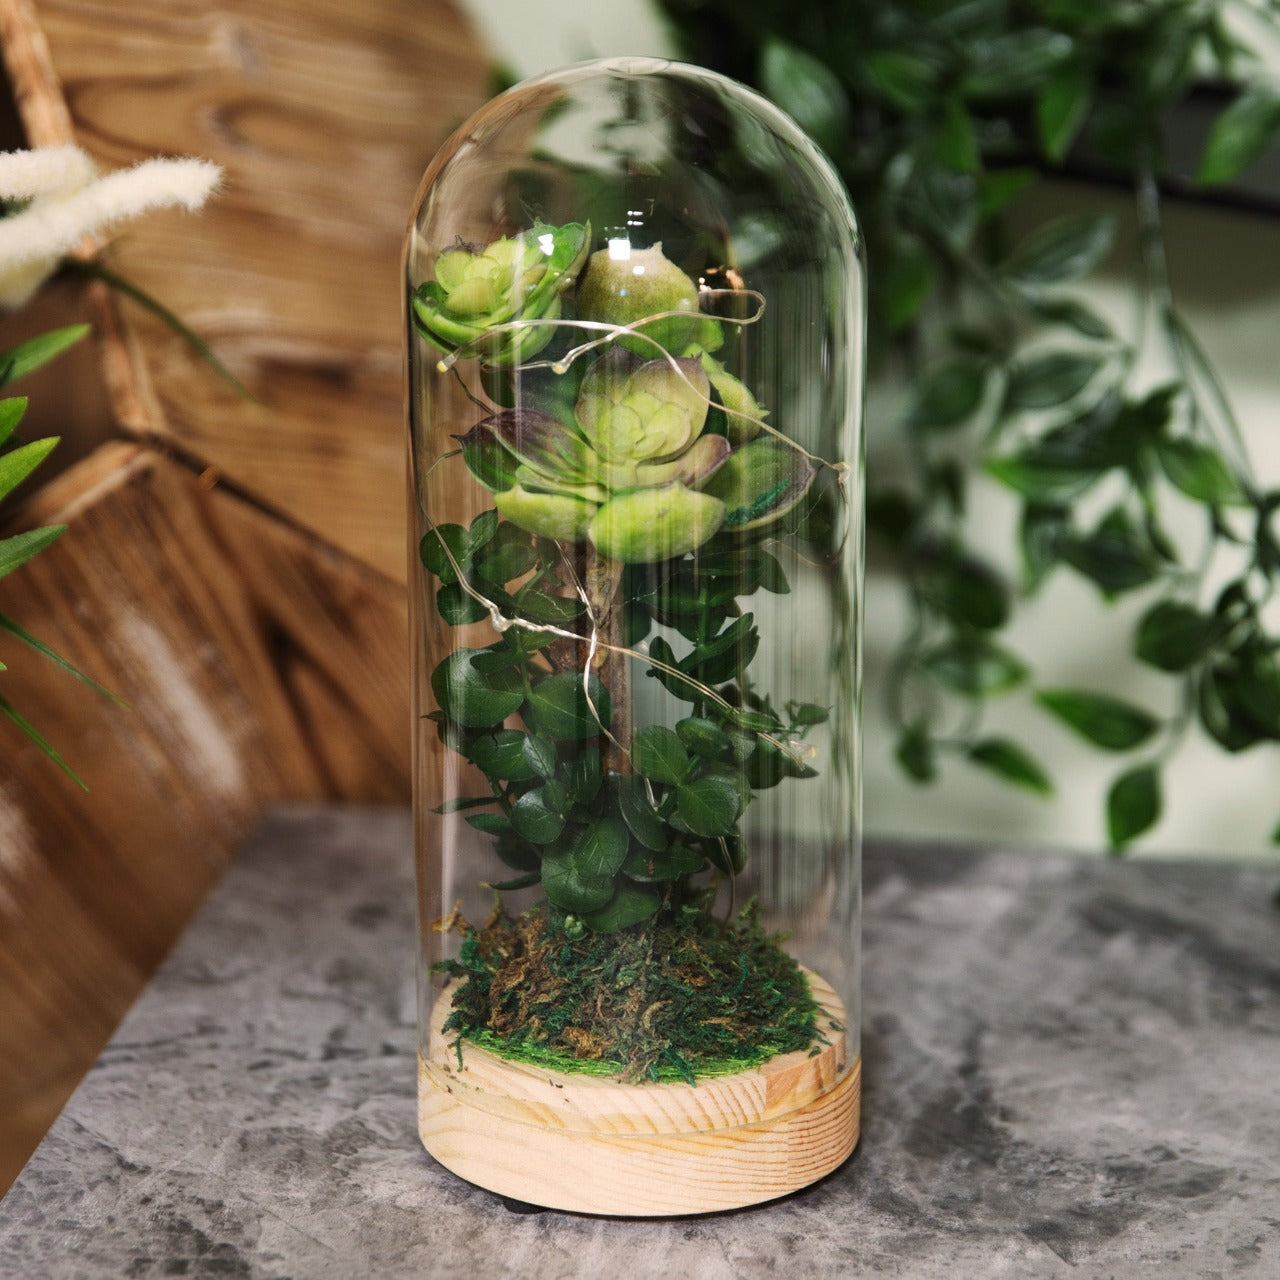 Dome Glass Terrarium - Artificial Succulent & LEDs 22.5 cm  A beautiful glass terrarium light with green artificial succulents. From the Retreat collection by HESTIA® - create a haven of soothing minimalism at home.